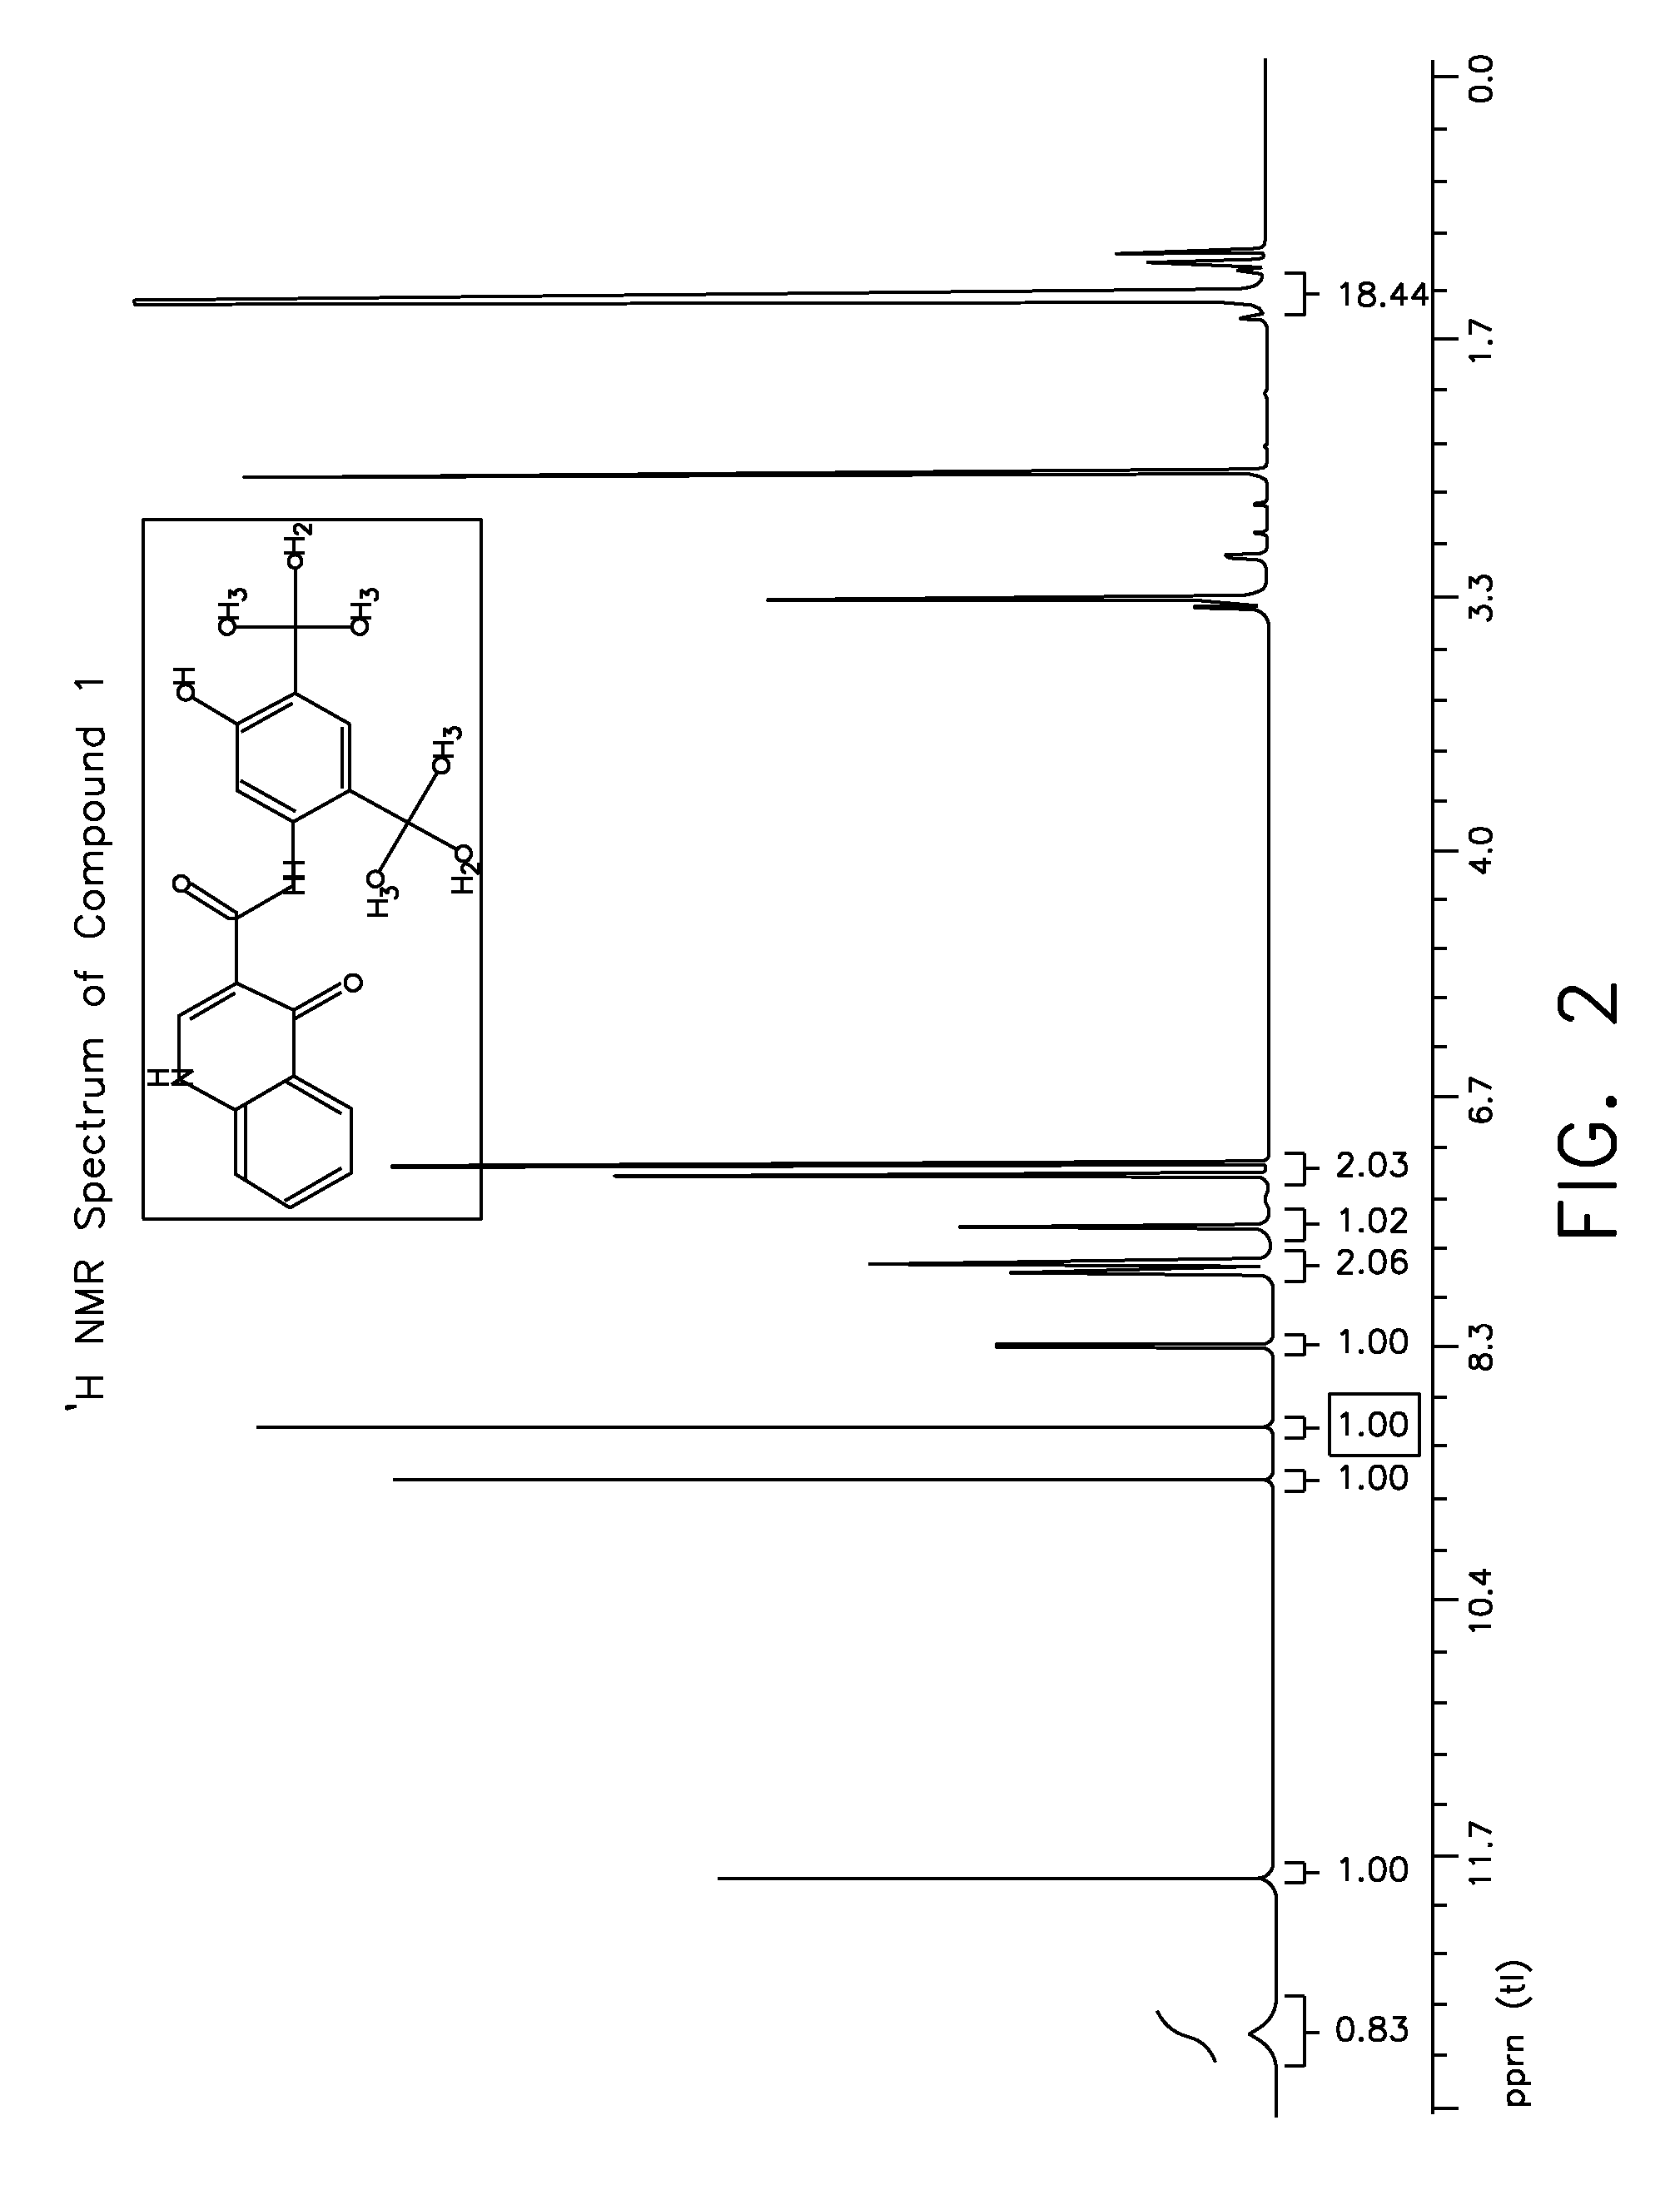 Compositions of N-[2,4-bis(1,1-dimethylethyl)-5-hydroxyphenyl]-1,4-dihydro-4-oxoquinoline-3-carboxamide